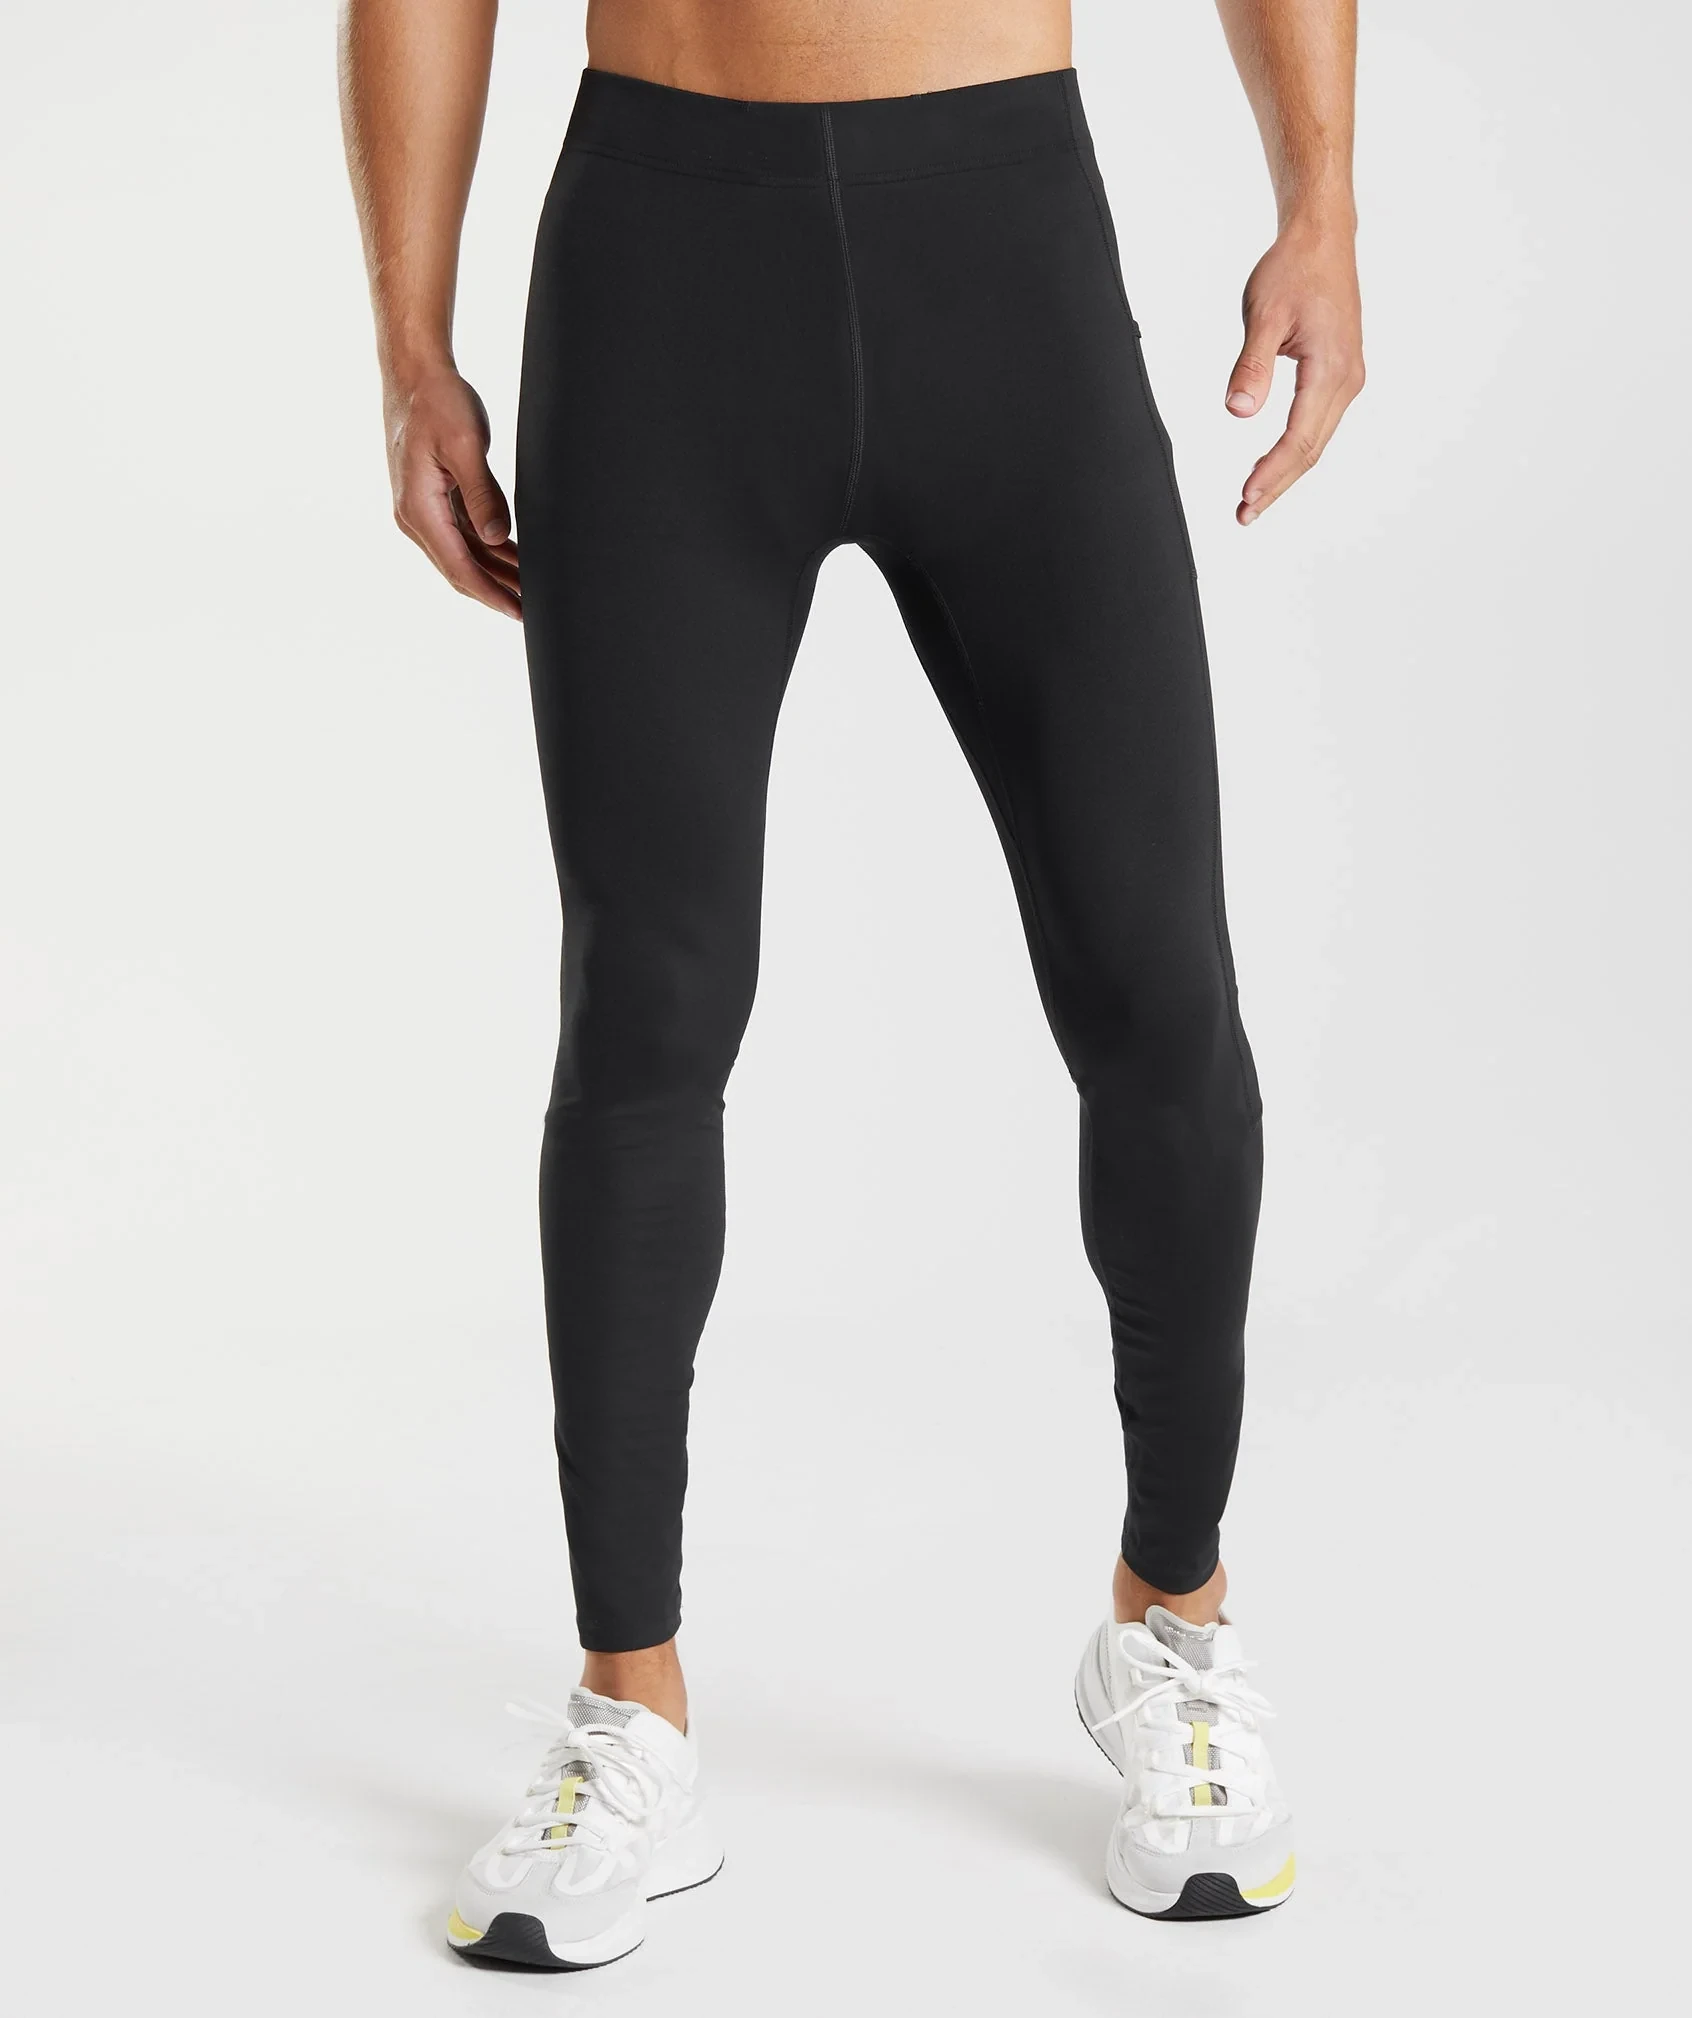 Essential Baselayer Full Tights